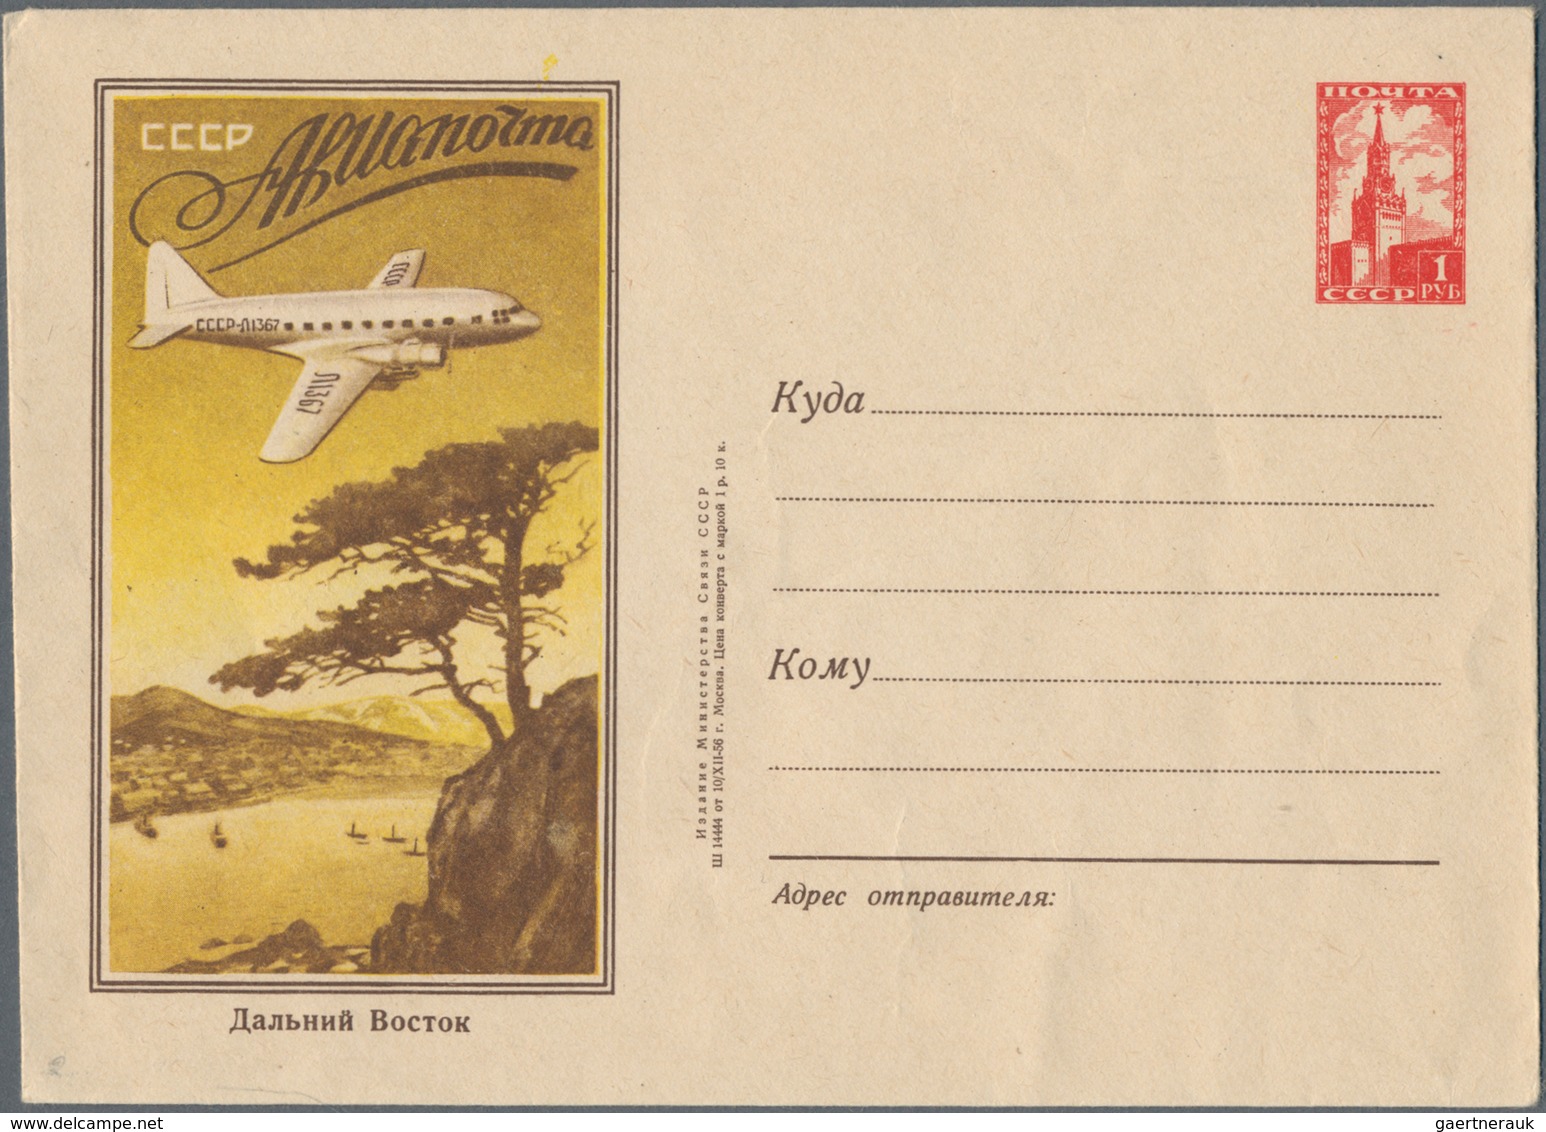 Sowjetunion - Ganzsachen: 1937/60 fantastic collection of about 660 almost exclusively unused pictur